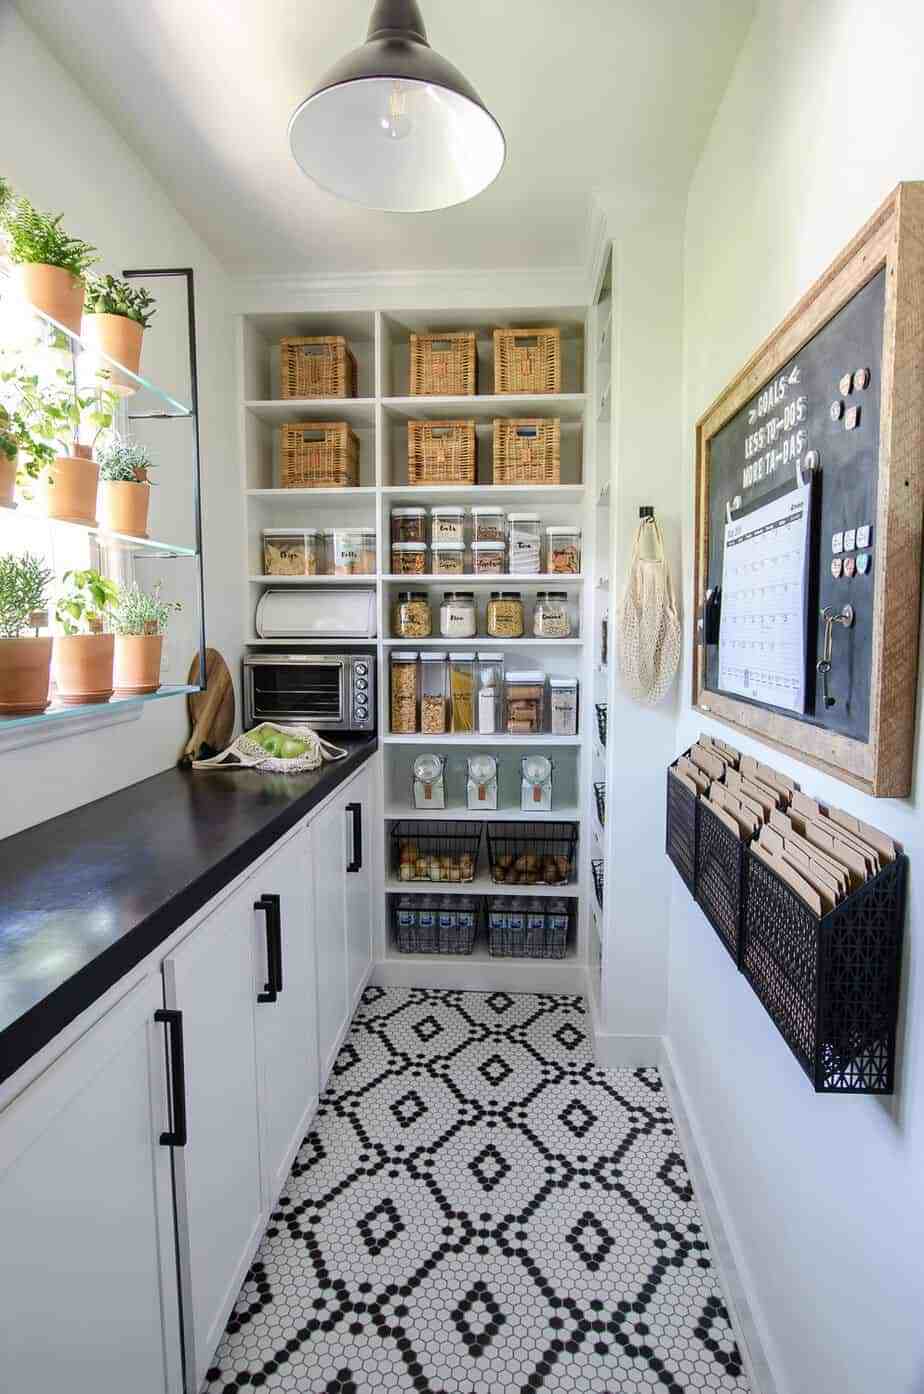 https://foxhollowcottage.com/wp-content/uploads/2020/03/20-Real-Life-DIY-Pantry-Makeovers-With-Organizing-Tips-And-Ideas-at-Fox-Hollow-Cottage-A-narrow-walk-in-pantry-with-counters-and-open-shelving-remincient-of-a-butlers-pantry.jpg